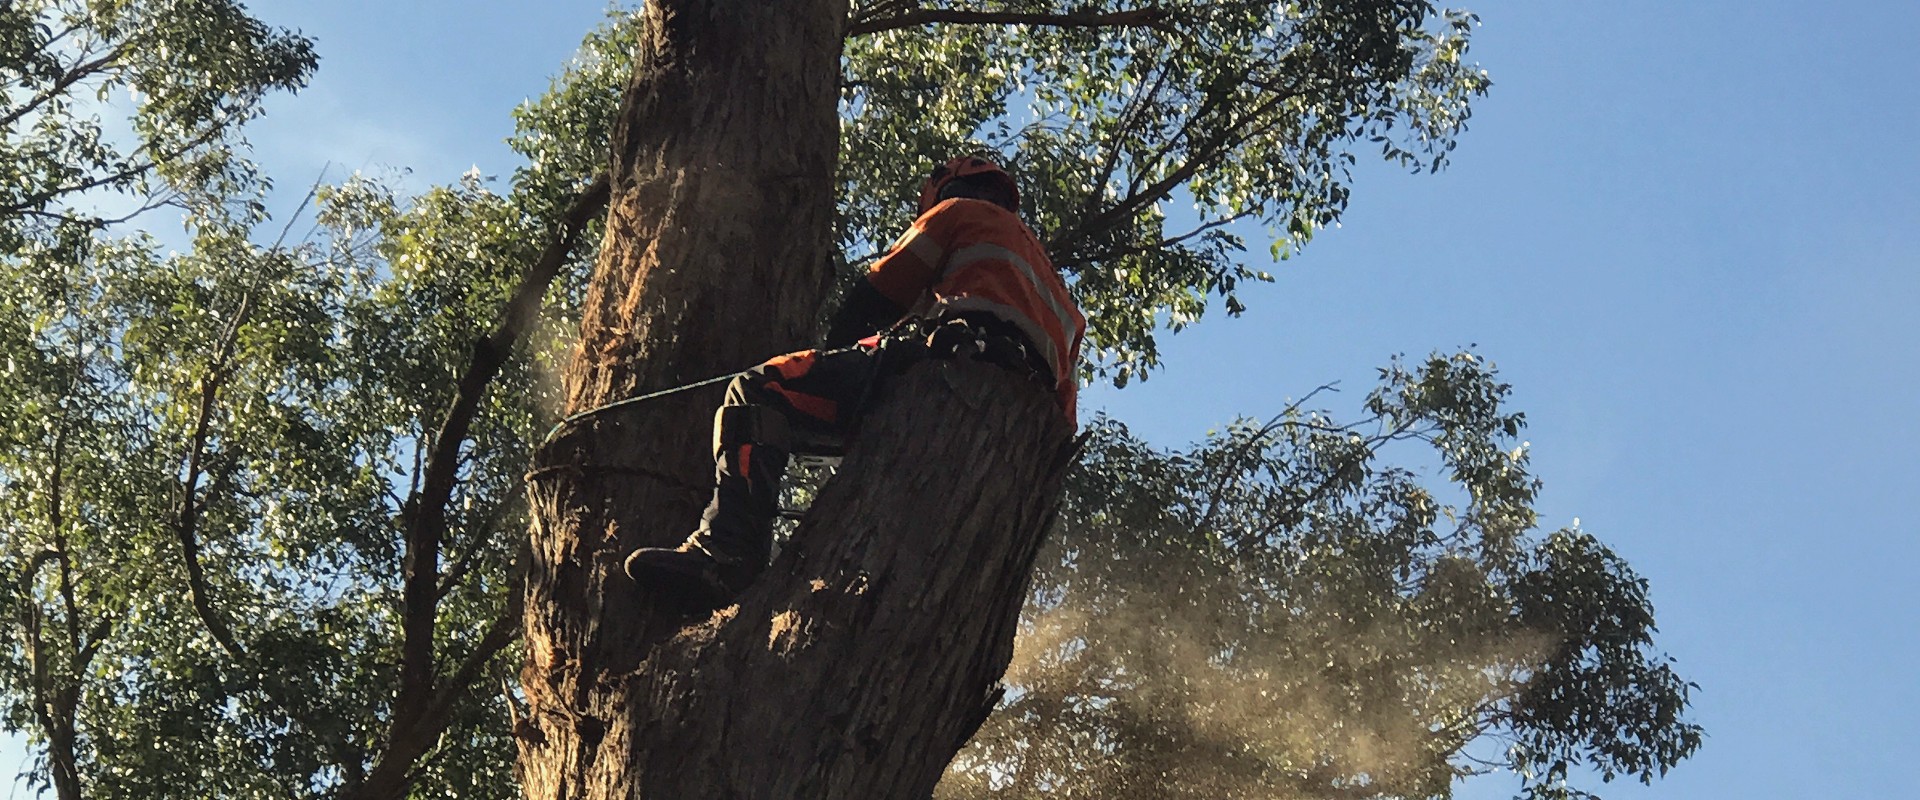 Arborist in high-vis up in a tree and chainsawing it.